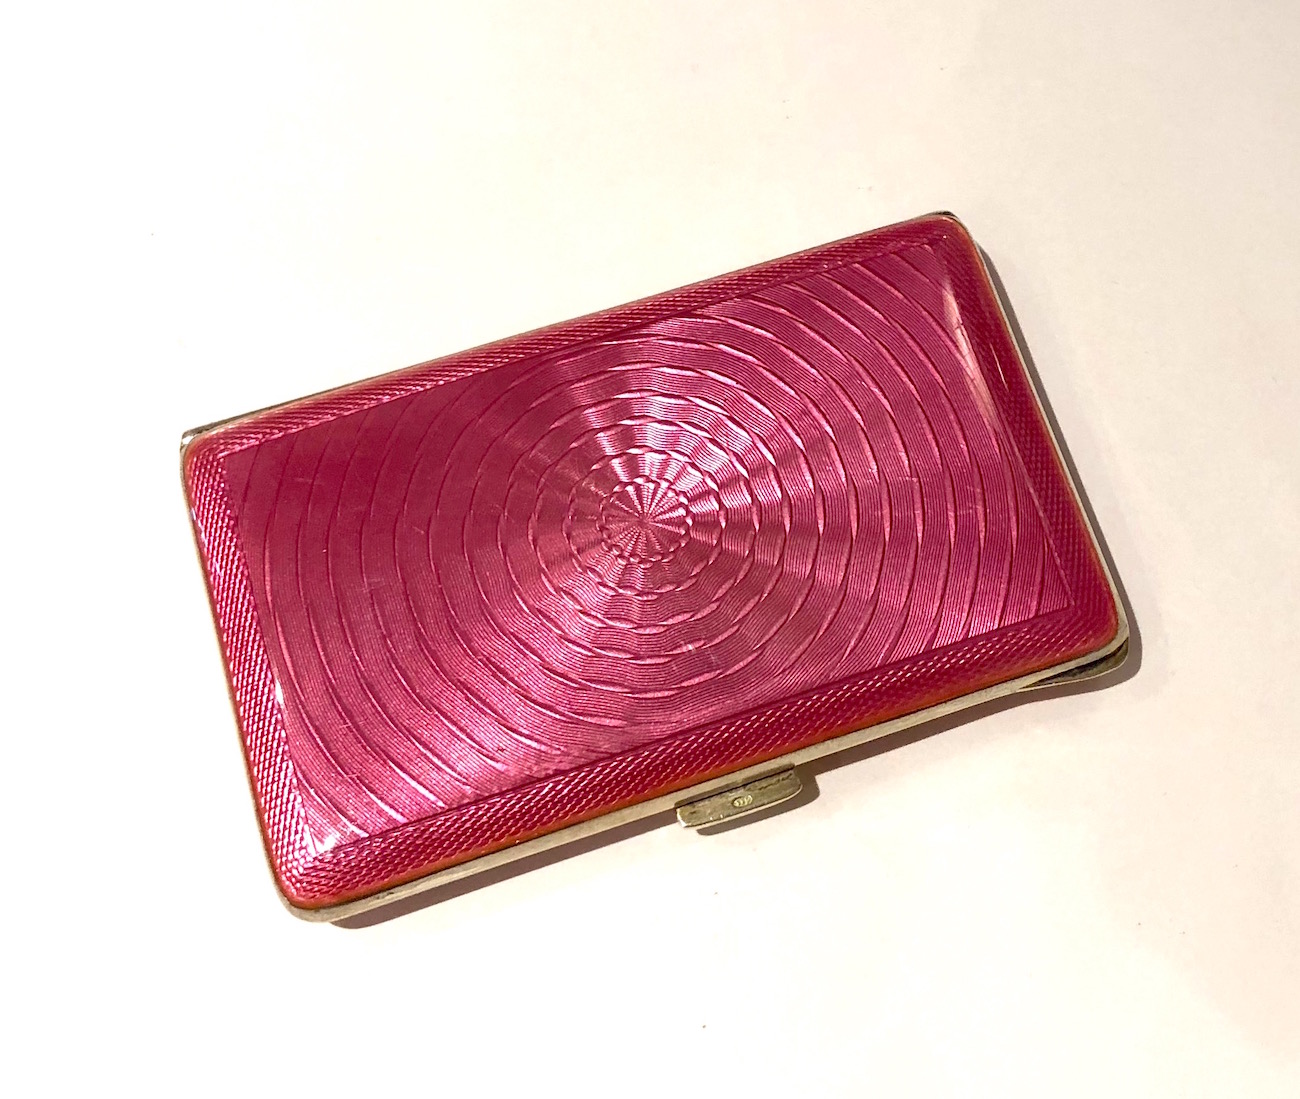 Art Deco Sterling and hot pink Guilloche enamel “Card” case, London import marks for Cohen & Charles, London, 1925